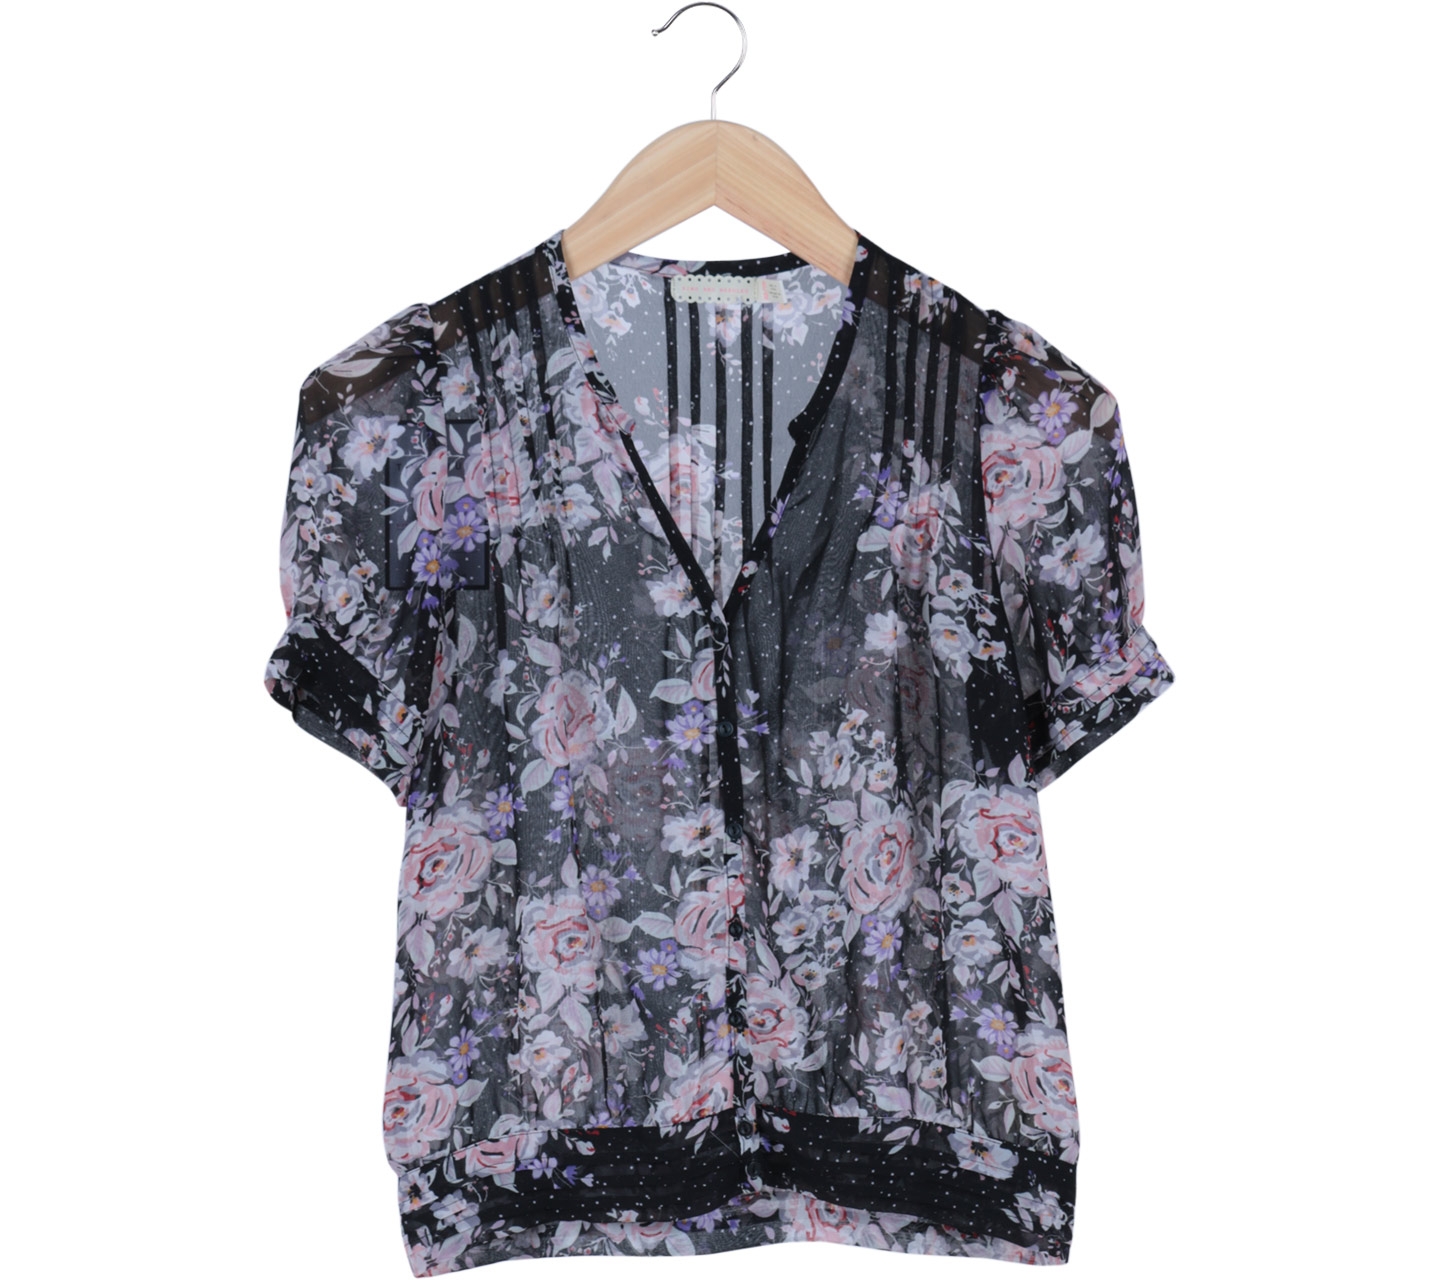 Urban Outfitters Black Floral Pleated Blouse